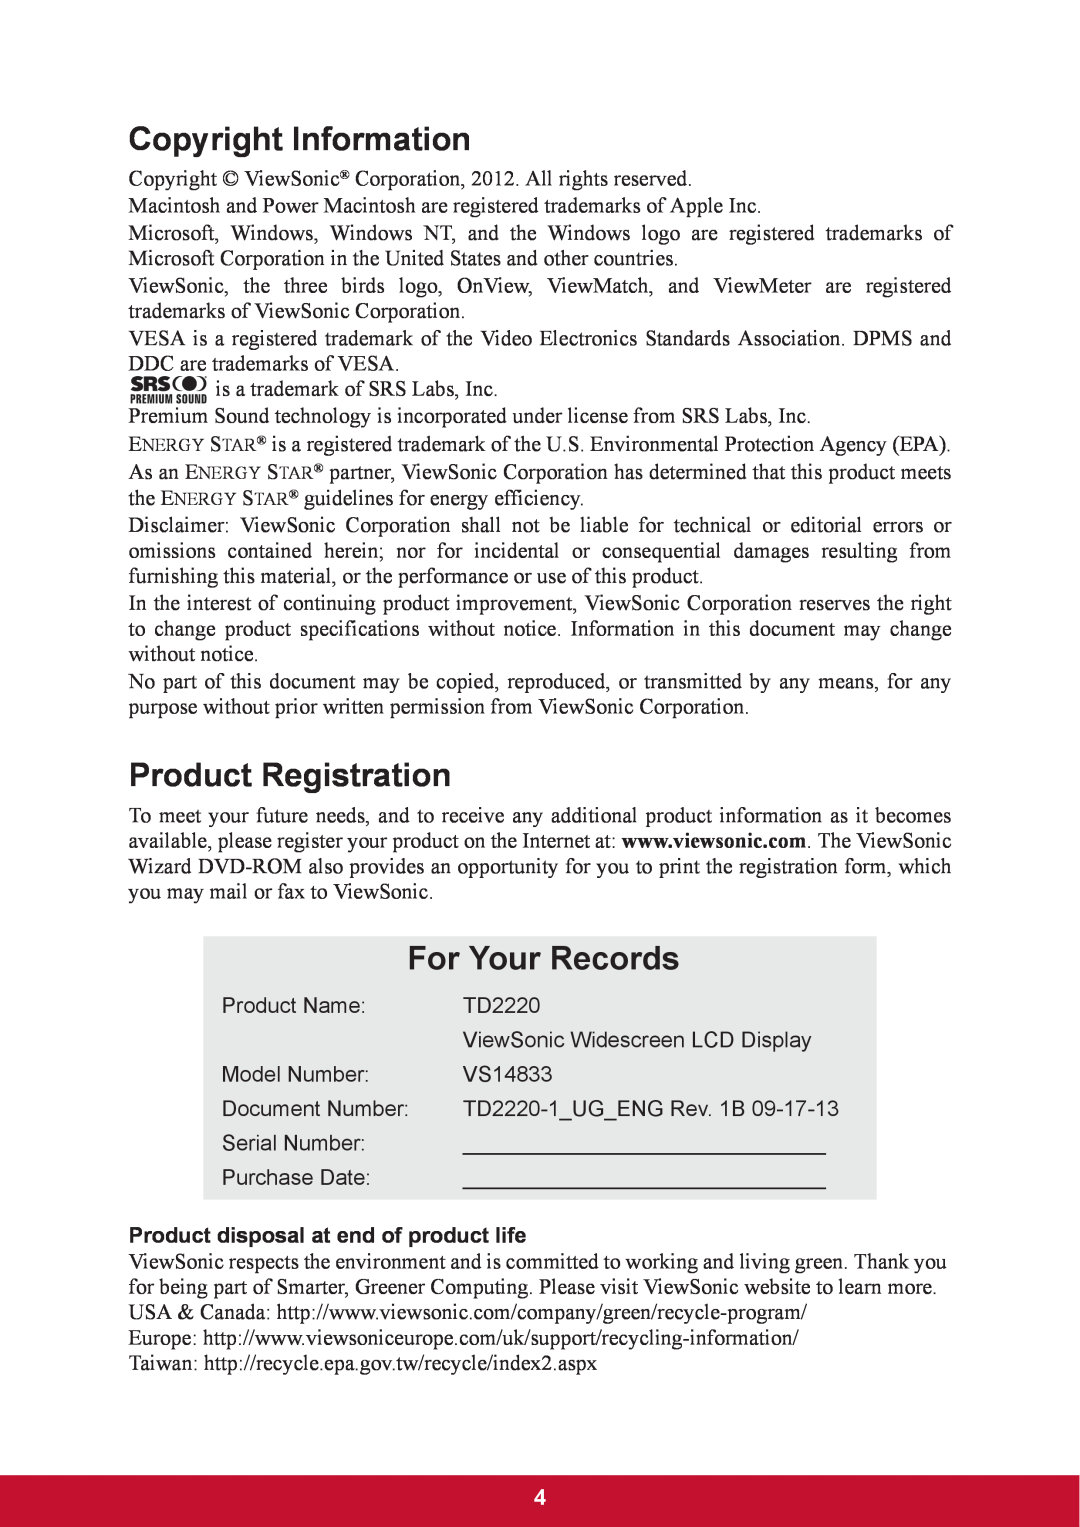 ViewSonic TD2220 Copyright Information, Product Registration, For Your Records, Product disposal at end of product life 